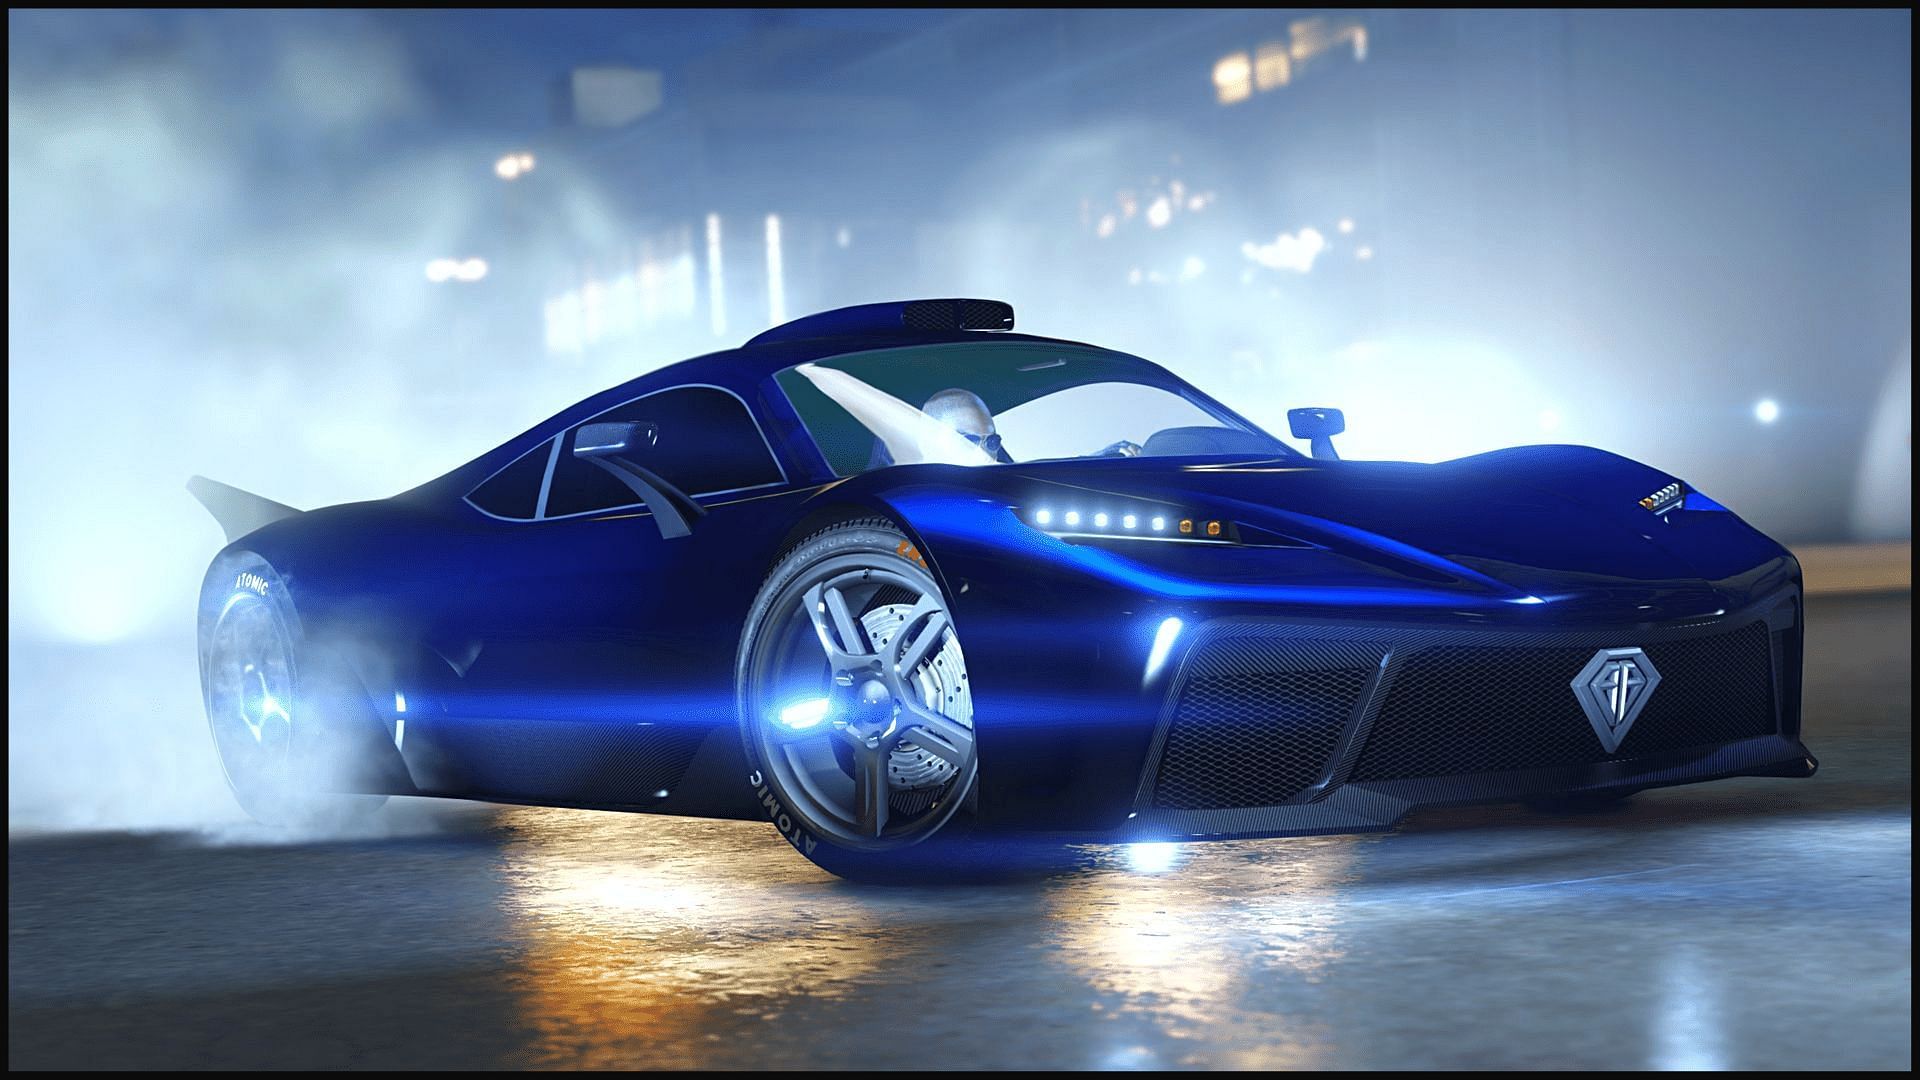 Benefactor cars are for sale in GTA Online (Image via Rockstar Games)